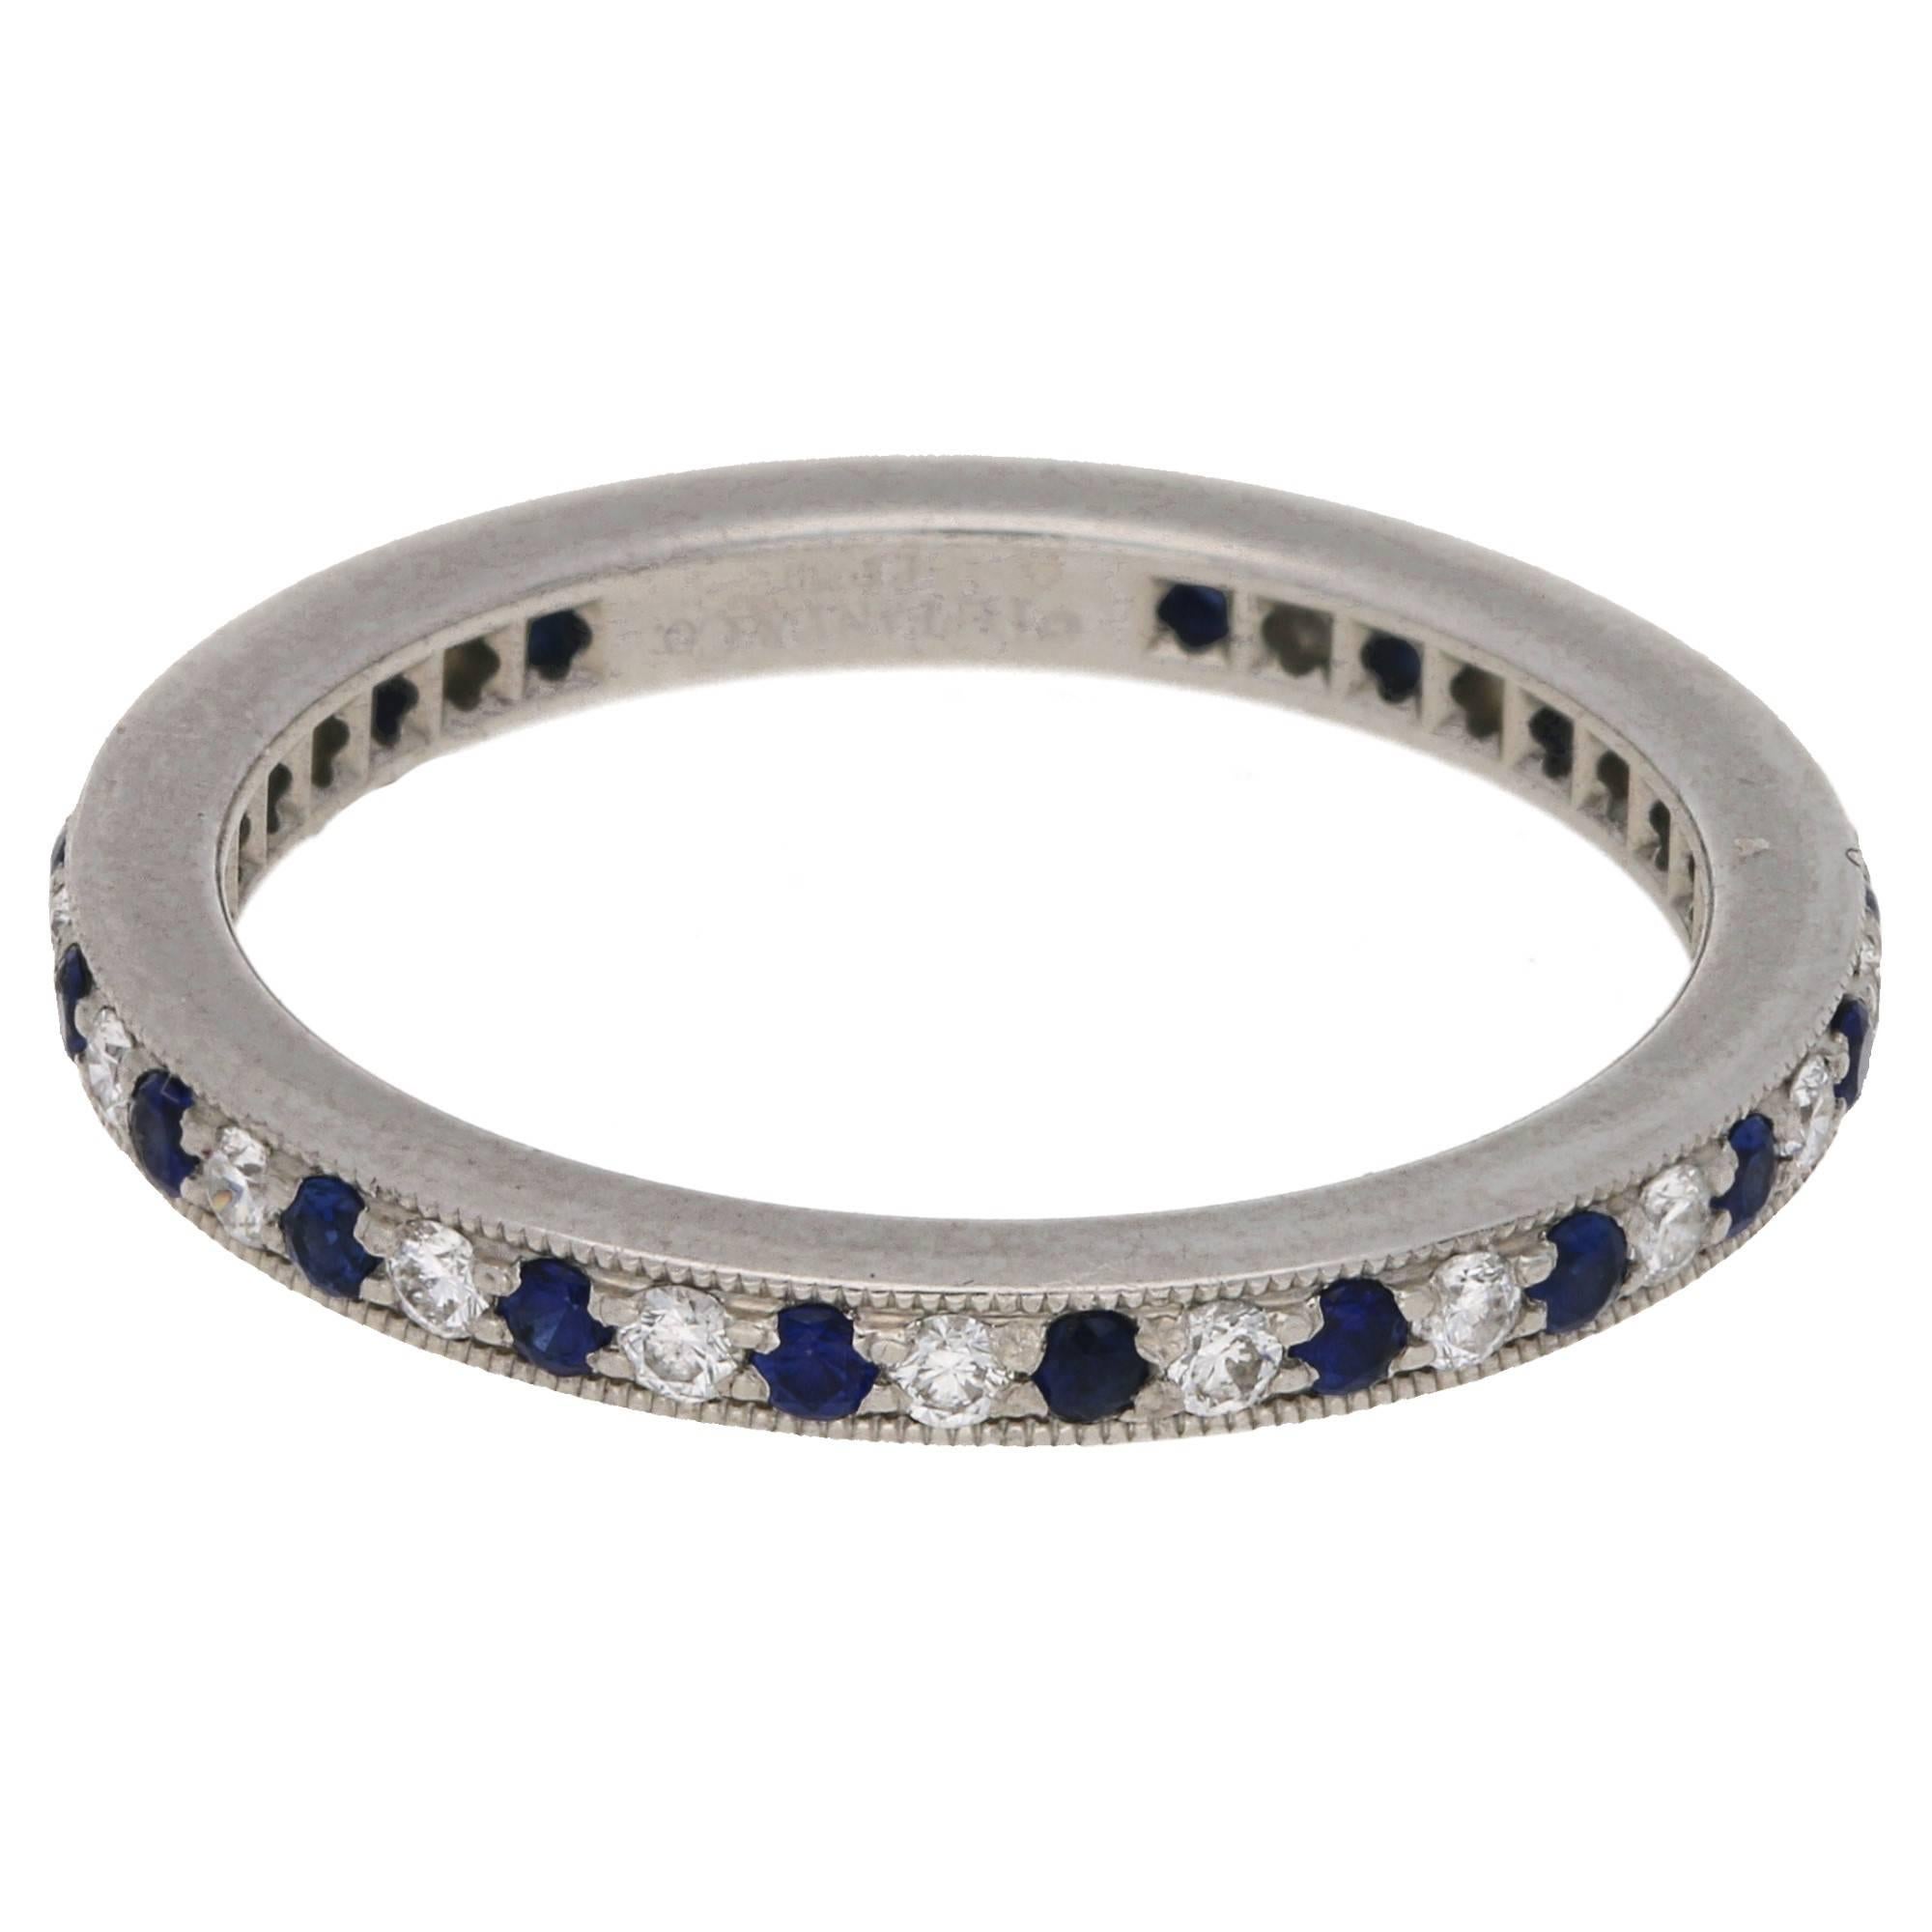 A fun and wearable vintage Tiffany and co eternity band. This contemporary ring evokes the glamour of the Edwardian period. Ring in platinum with a mille-grain edge and a full circle of bead-set round brilliant diamonds and sapphires. 2 mm wide.